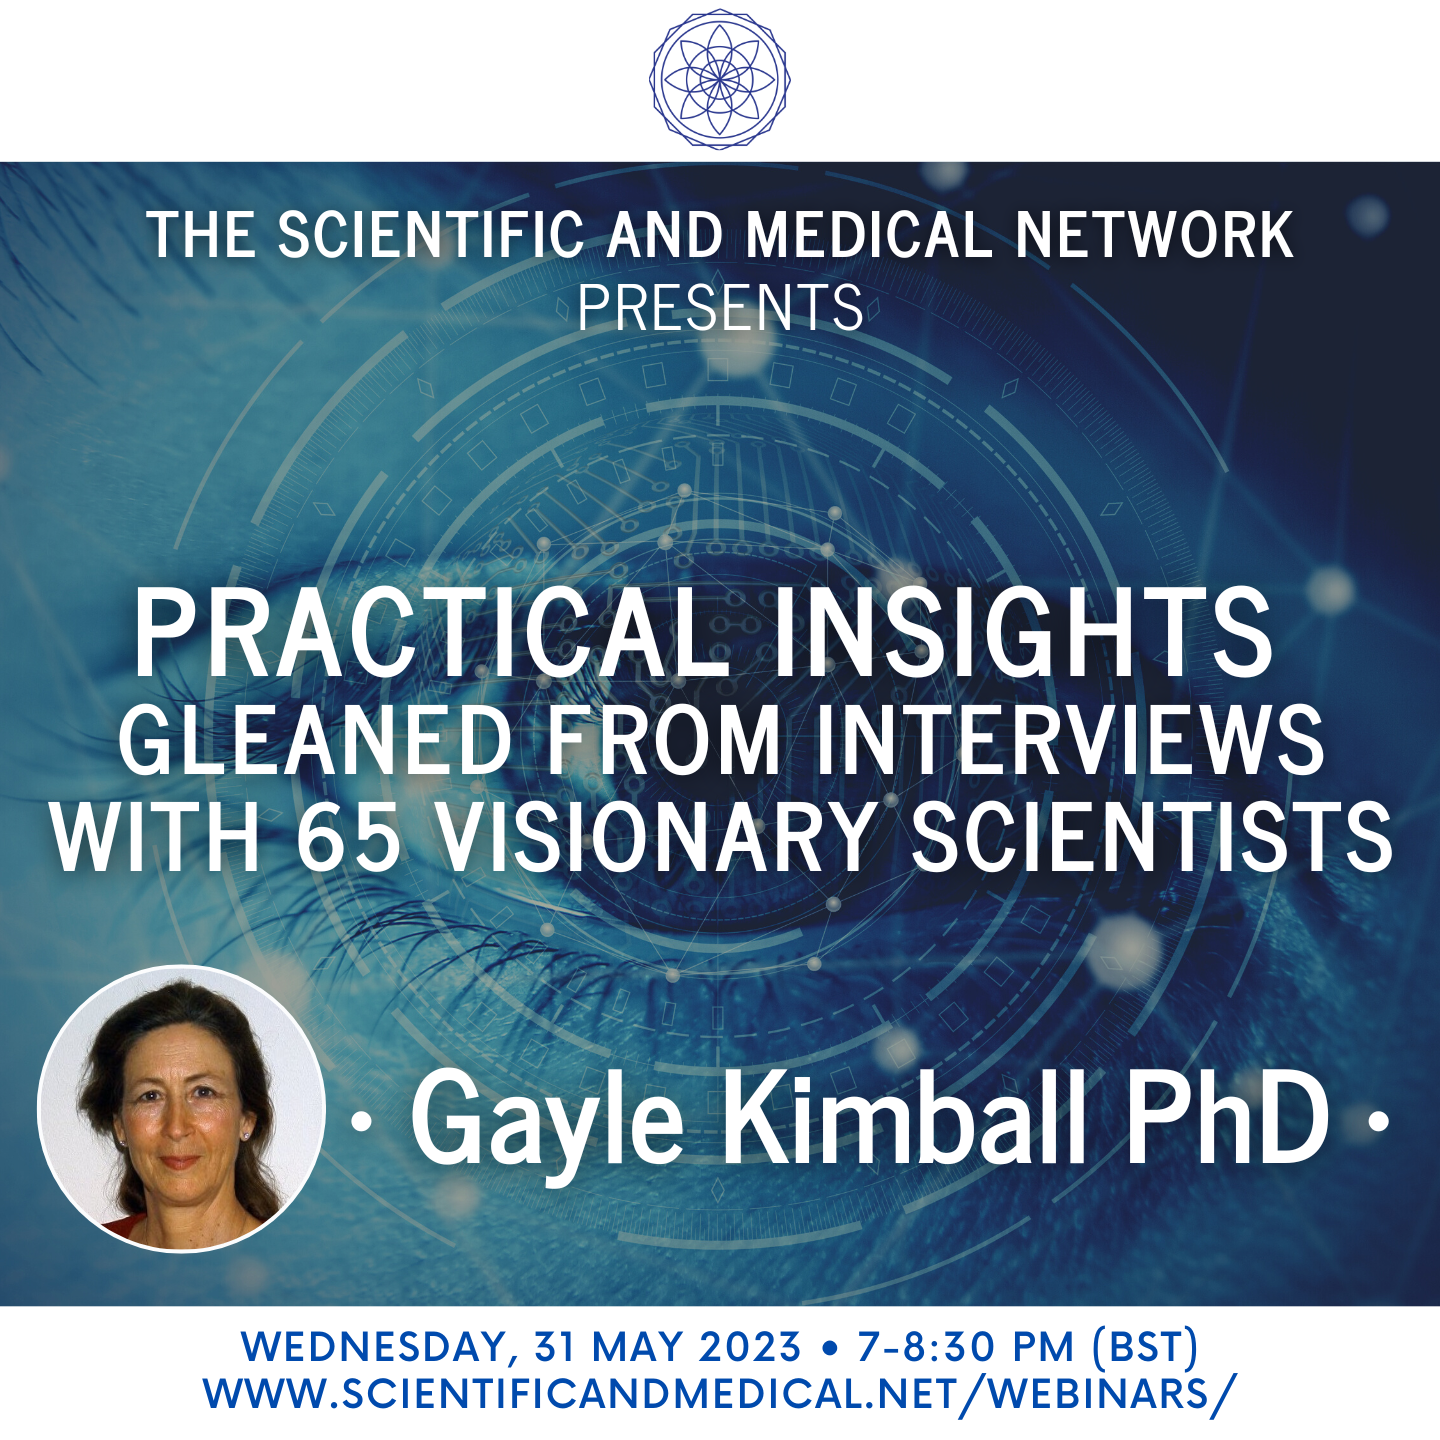 Gayle Kimball PhD – Practical Insights Gleaned from Interviews with 65 Visionary Scientists